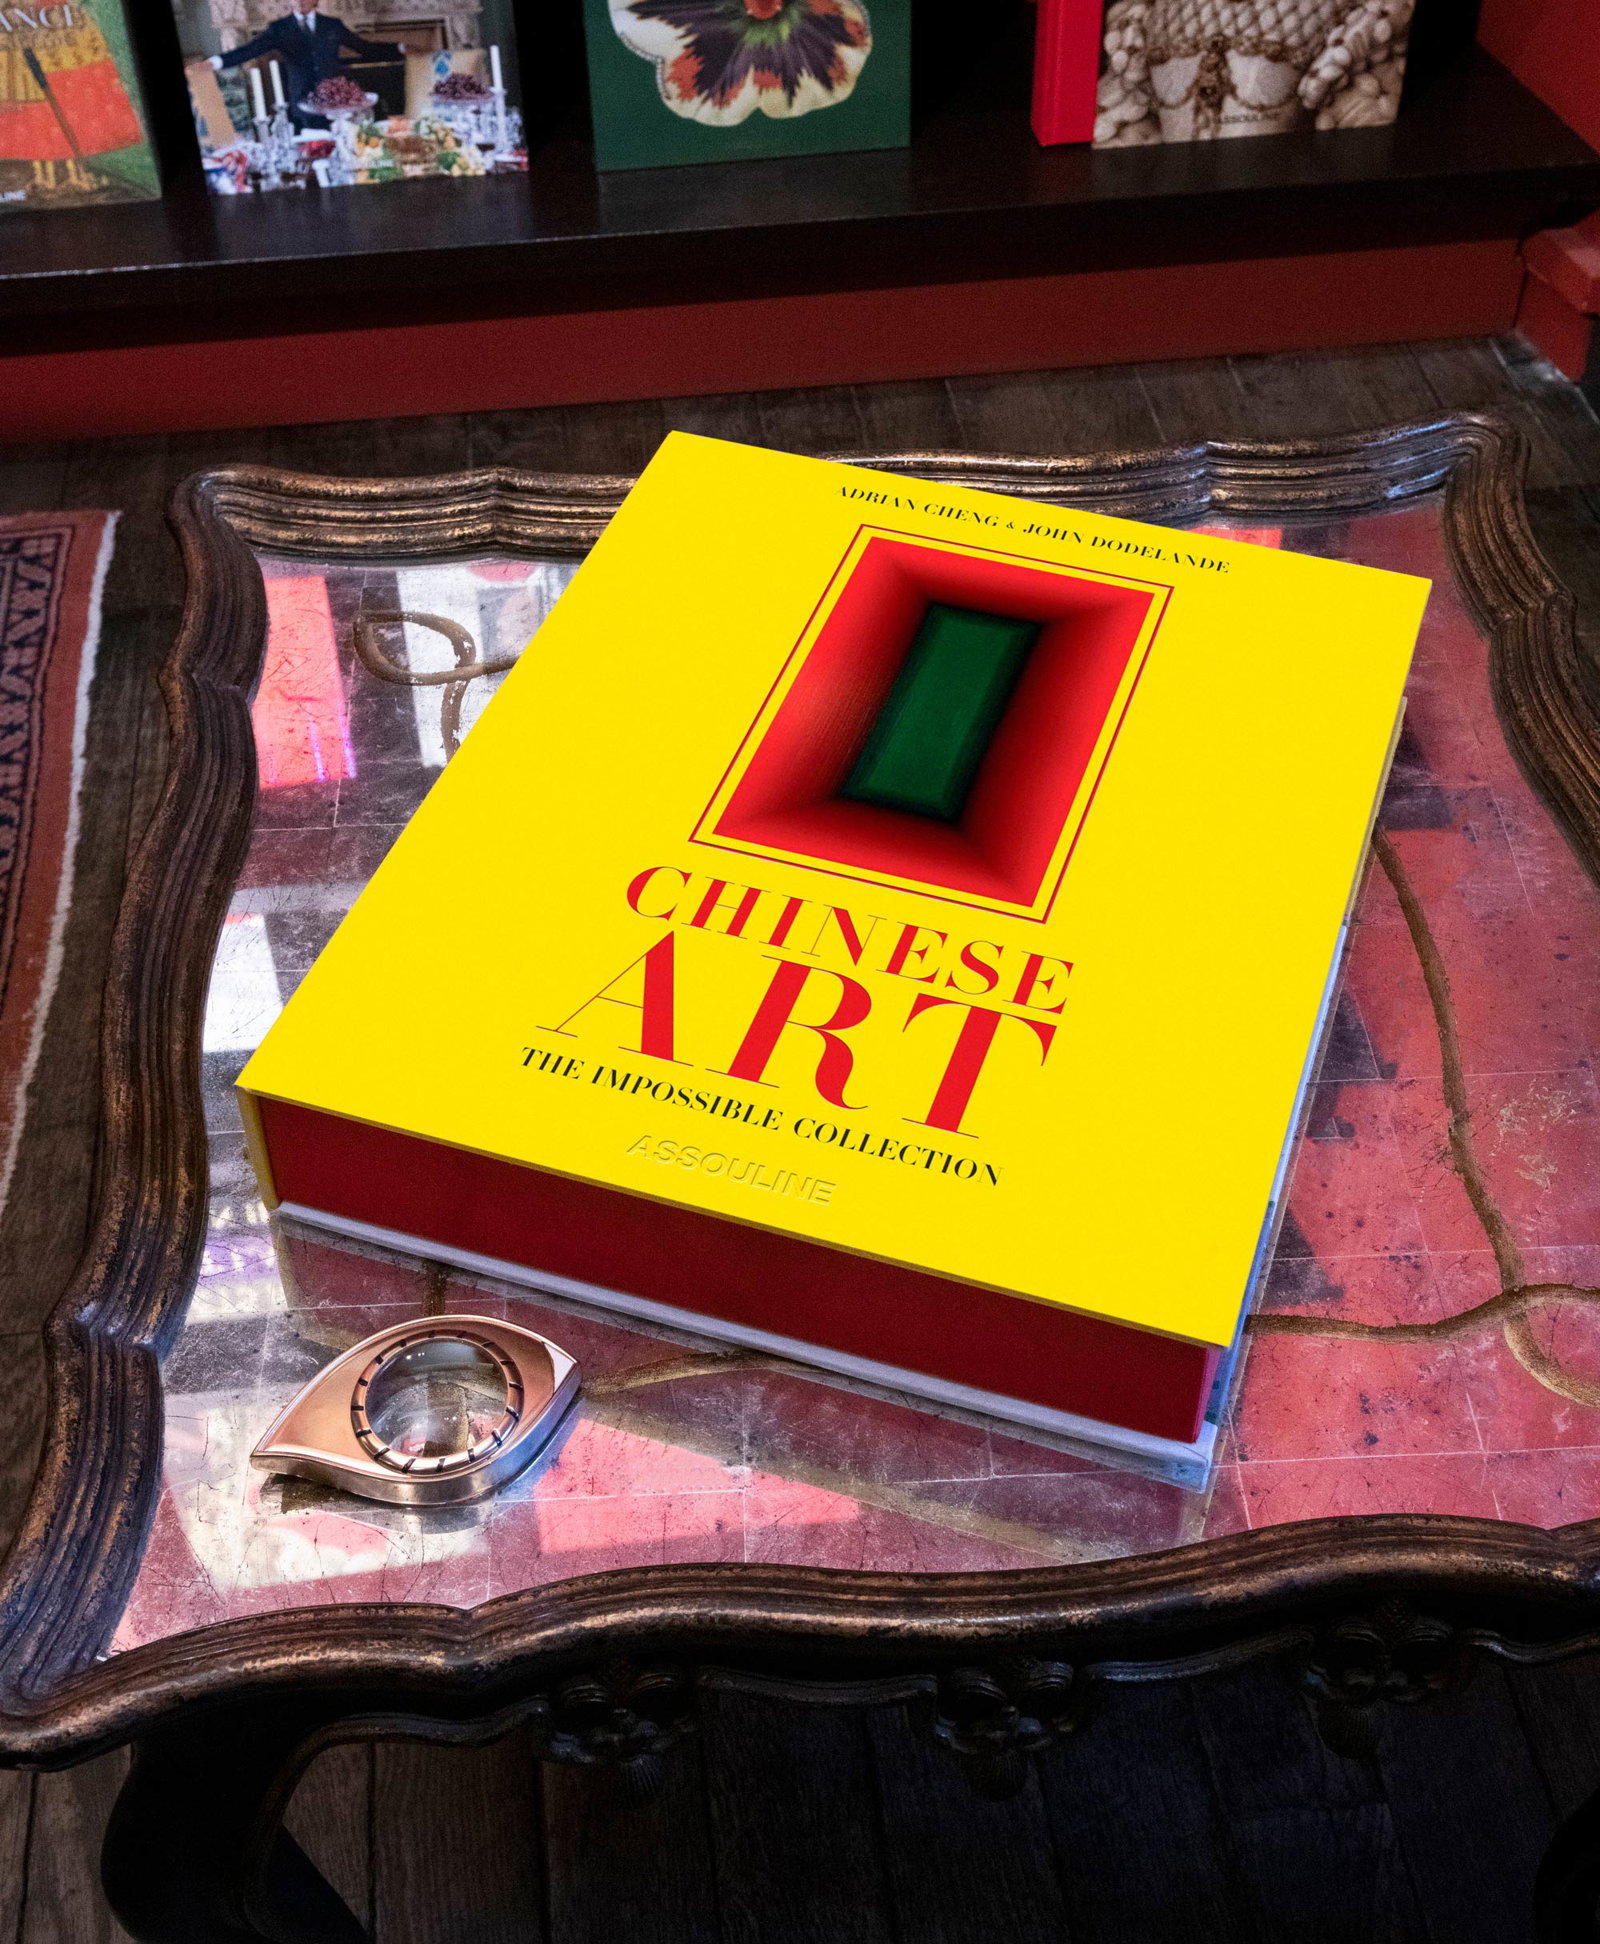 Versailles From Louis XIV To Jeff Koons Book in Yellow - Assouline